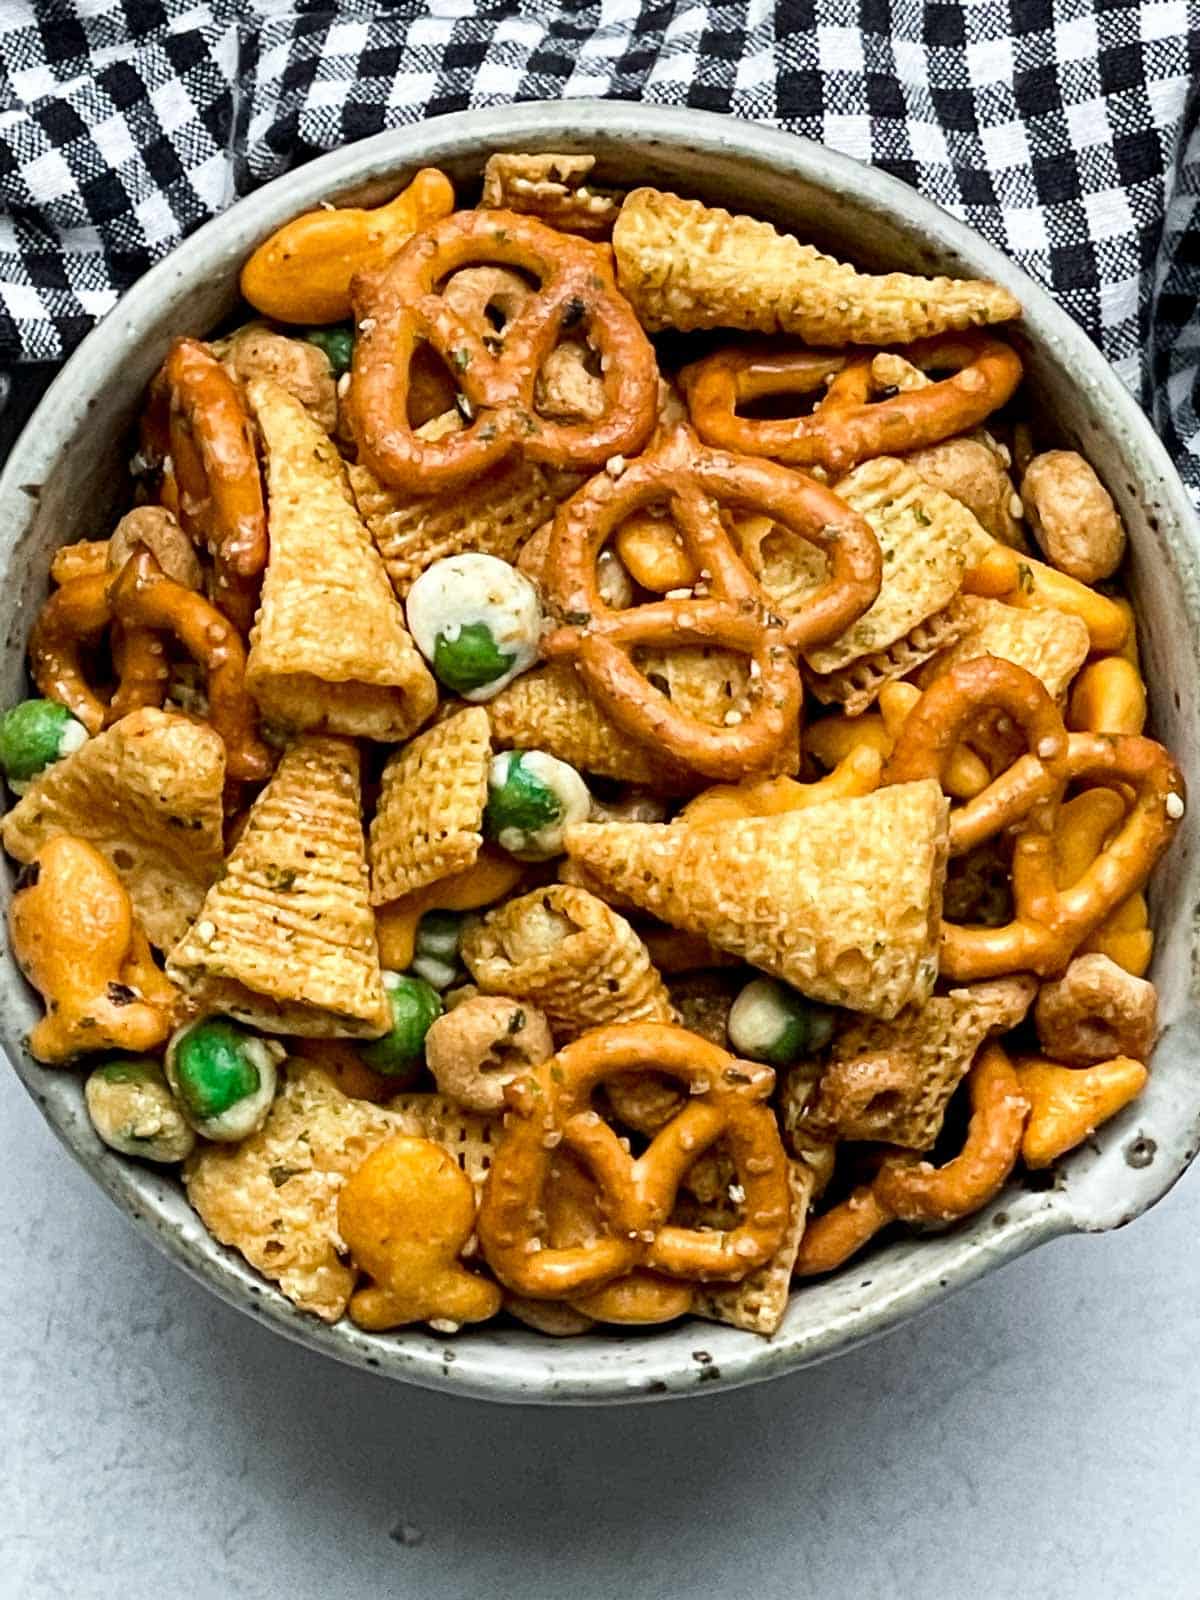 A bowl of Furikake Chex Mix on a gray surface with a black and white napkin on the side.